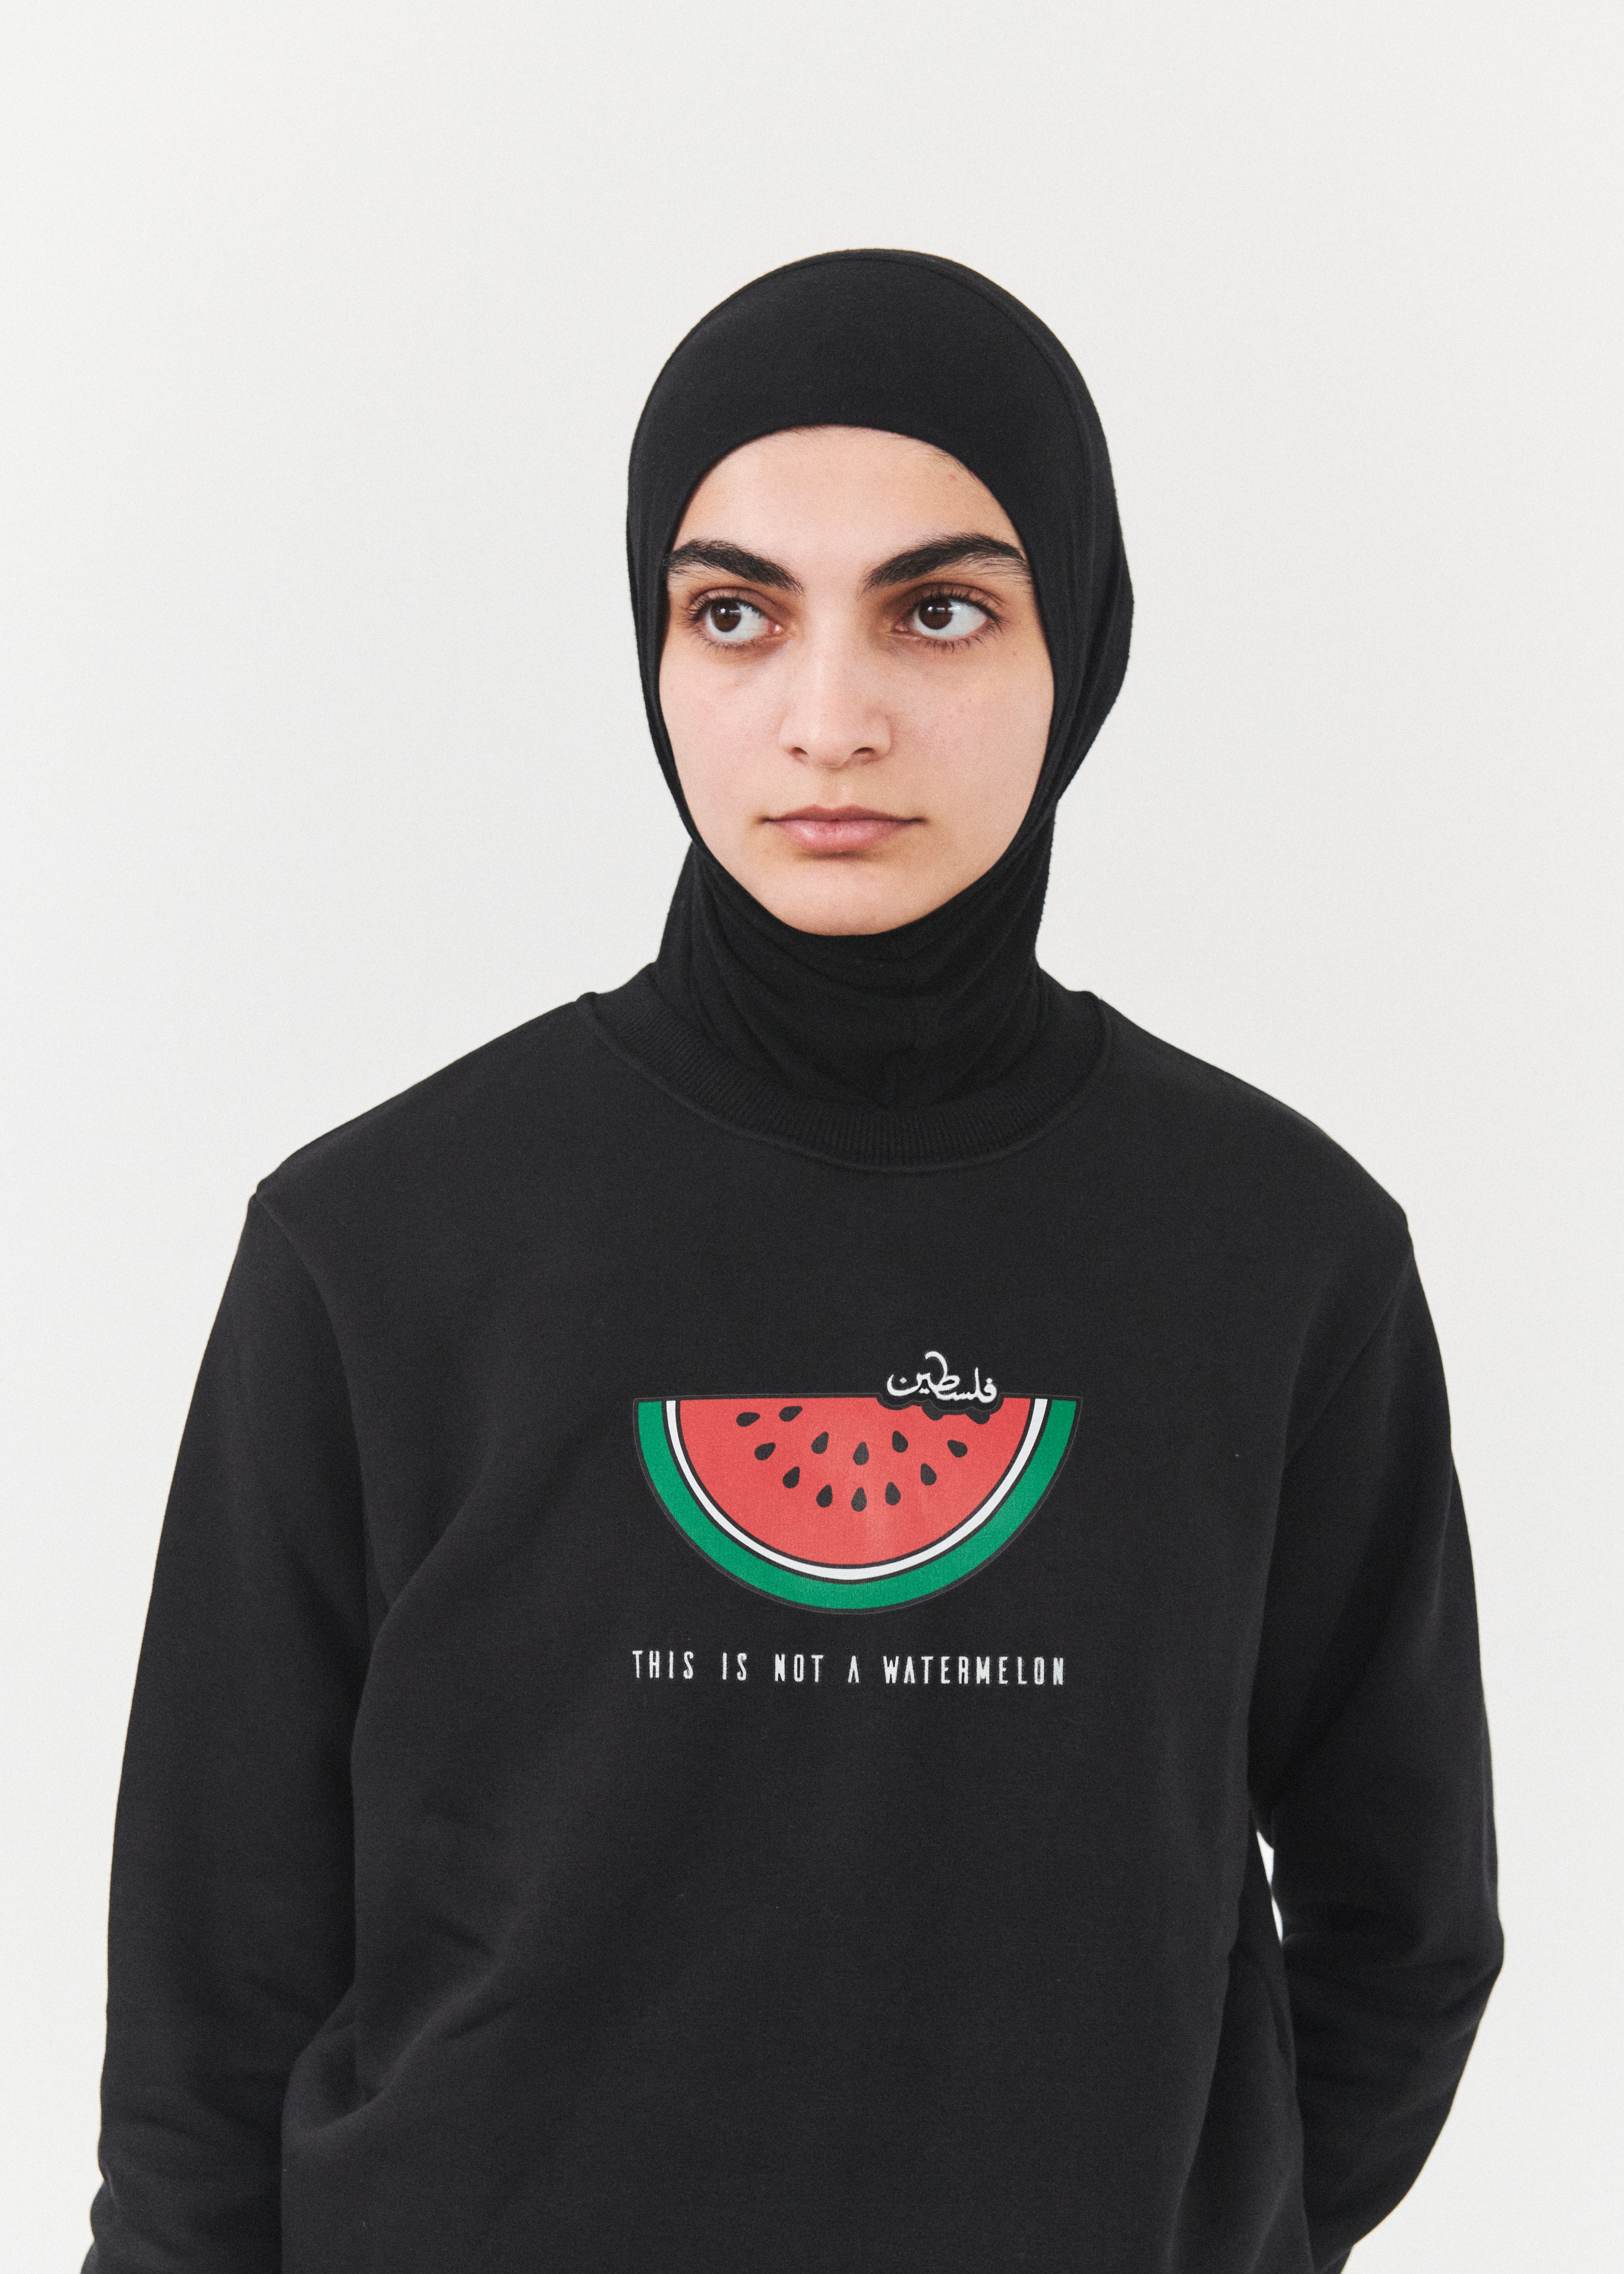 This is not a watermelon Sweatshirt